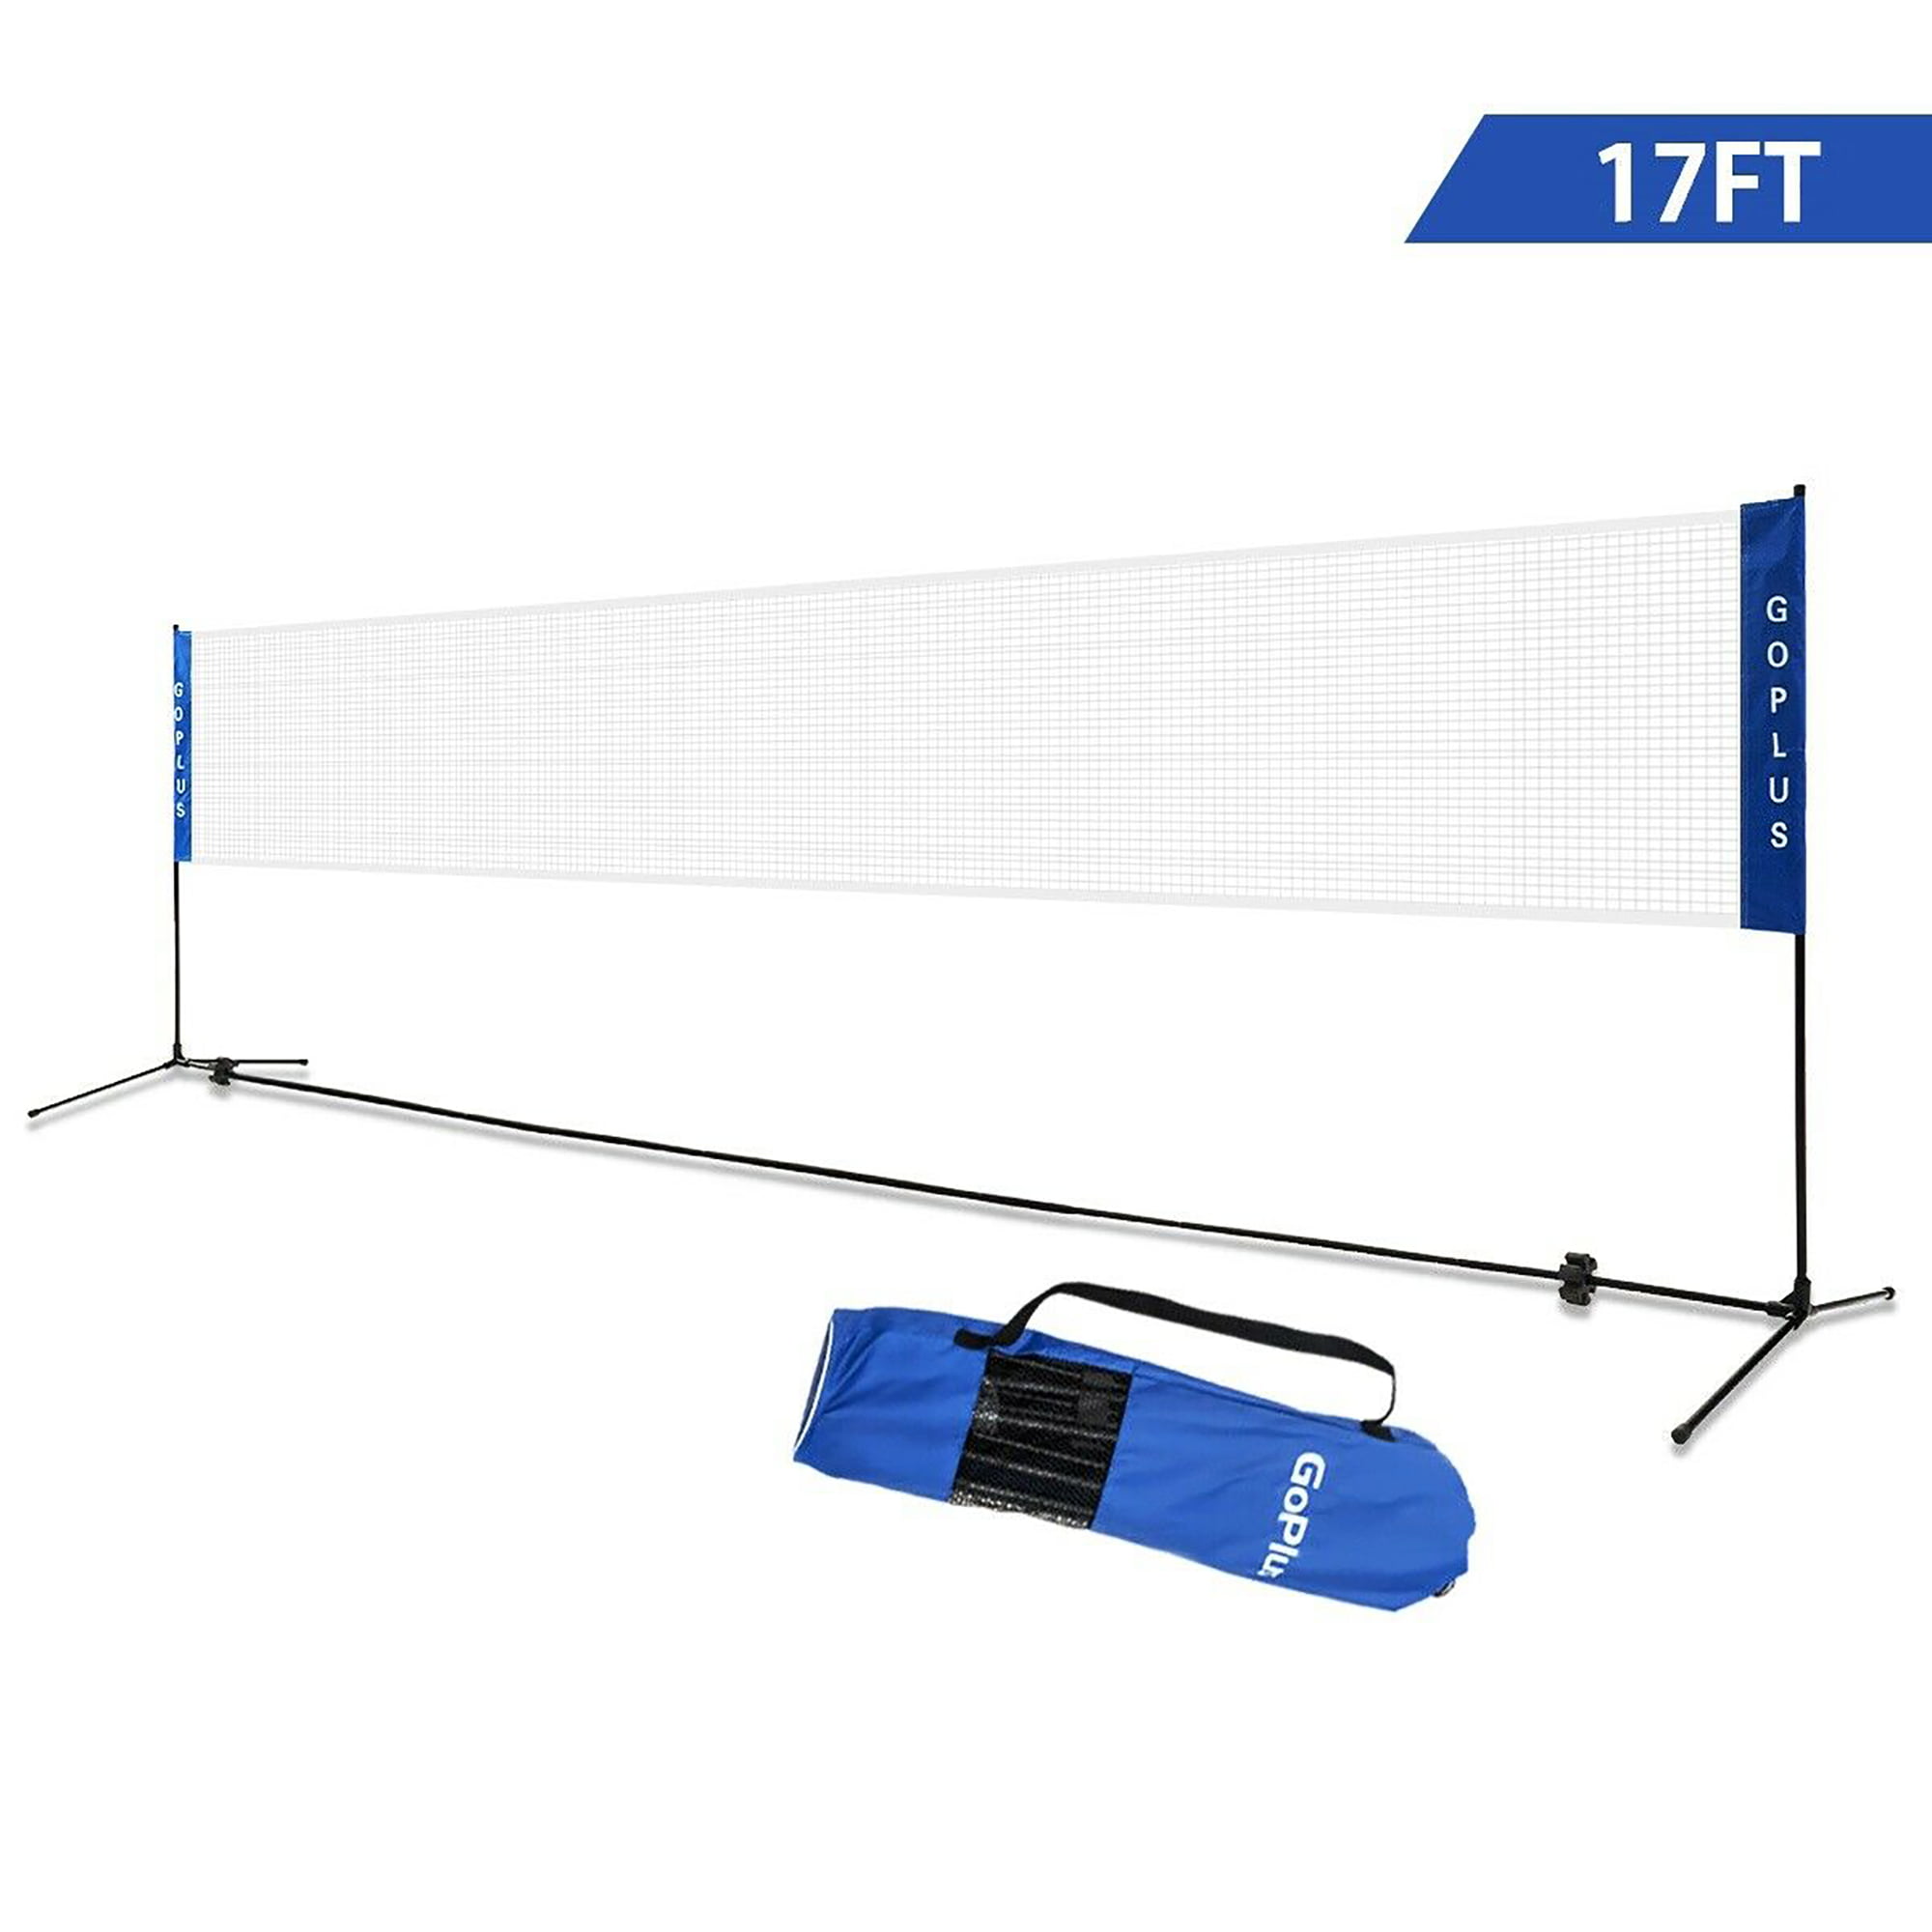 Volleyball Pickleball Badminton Net Set with Stand/Frame & Bag 17 Feet Portable 